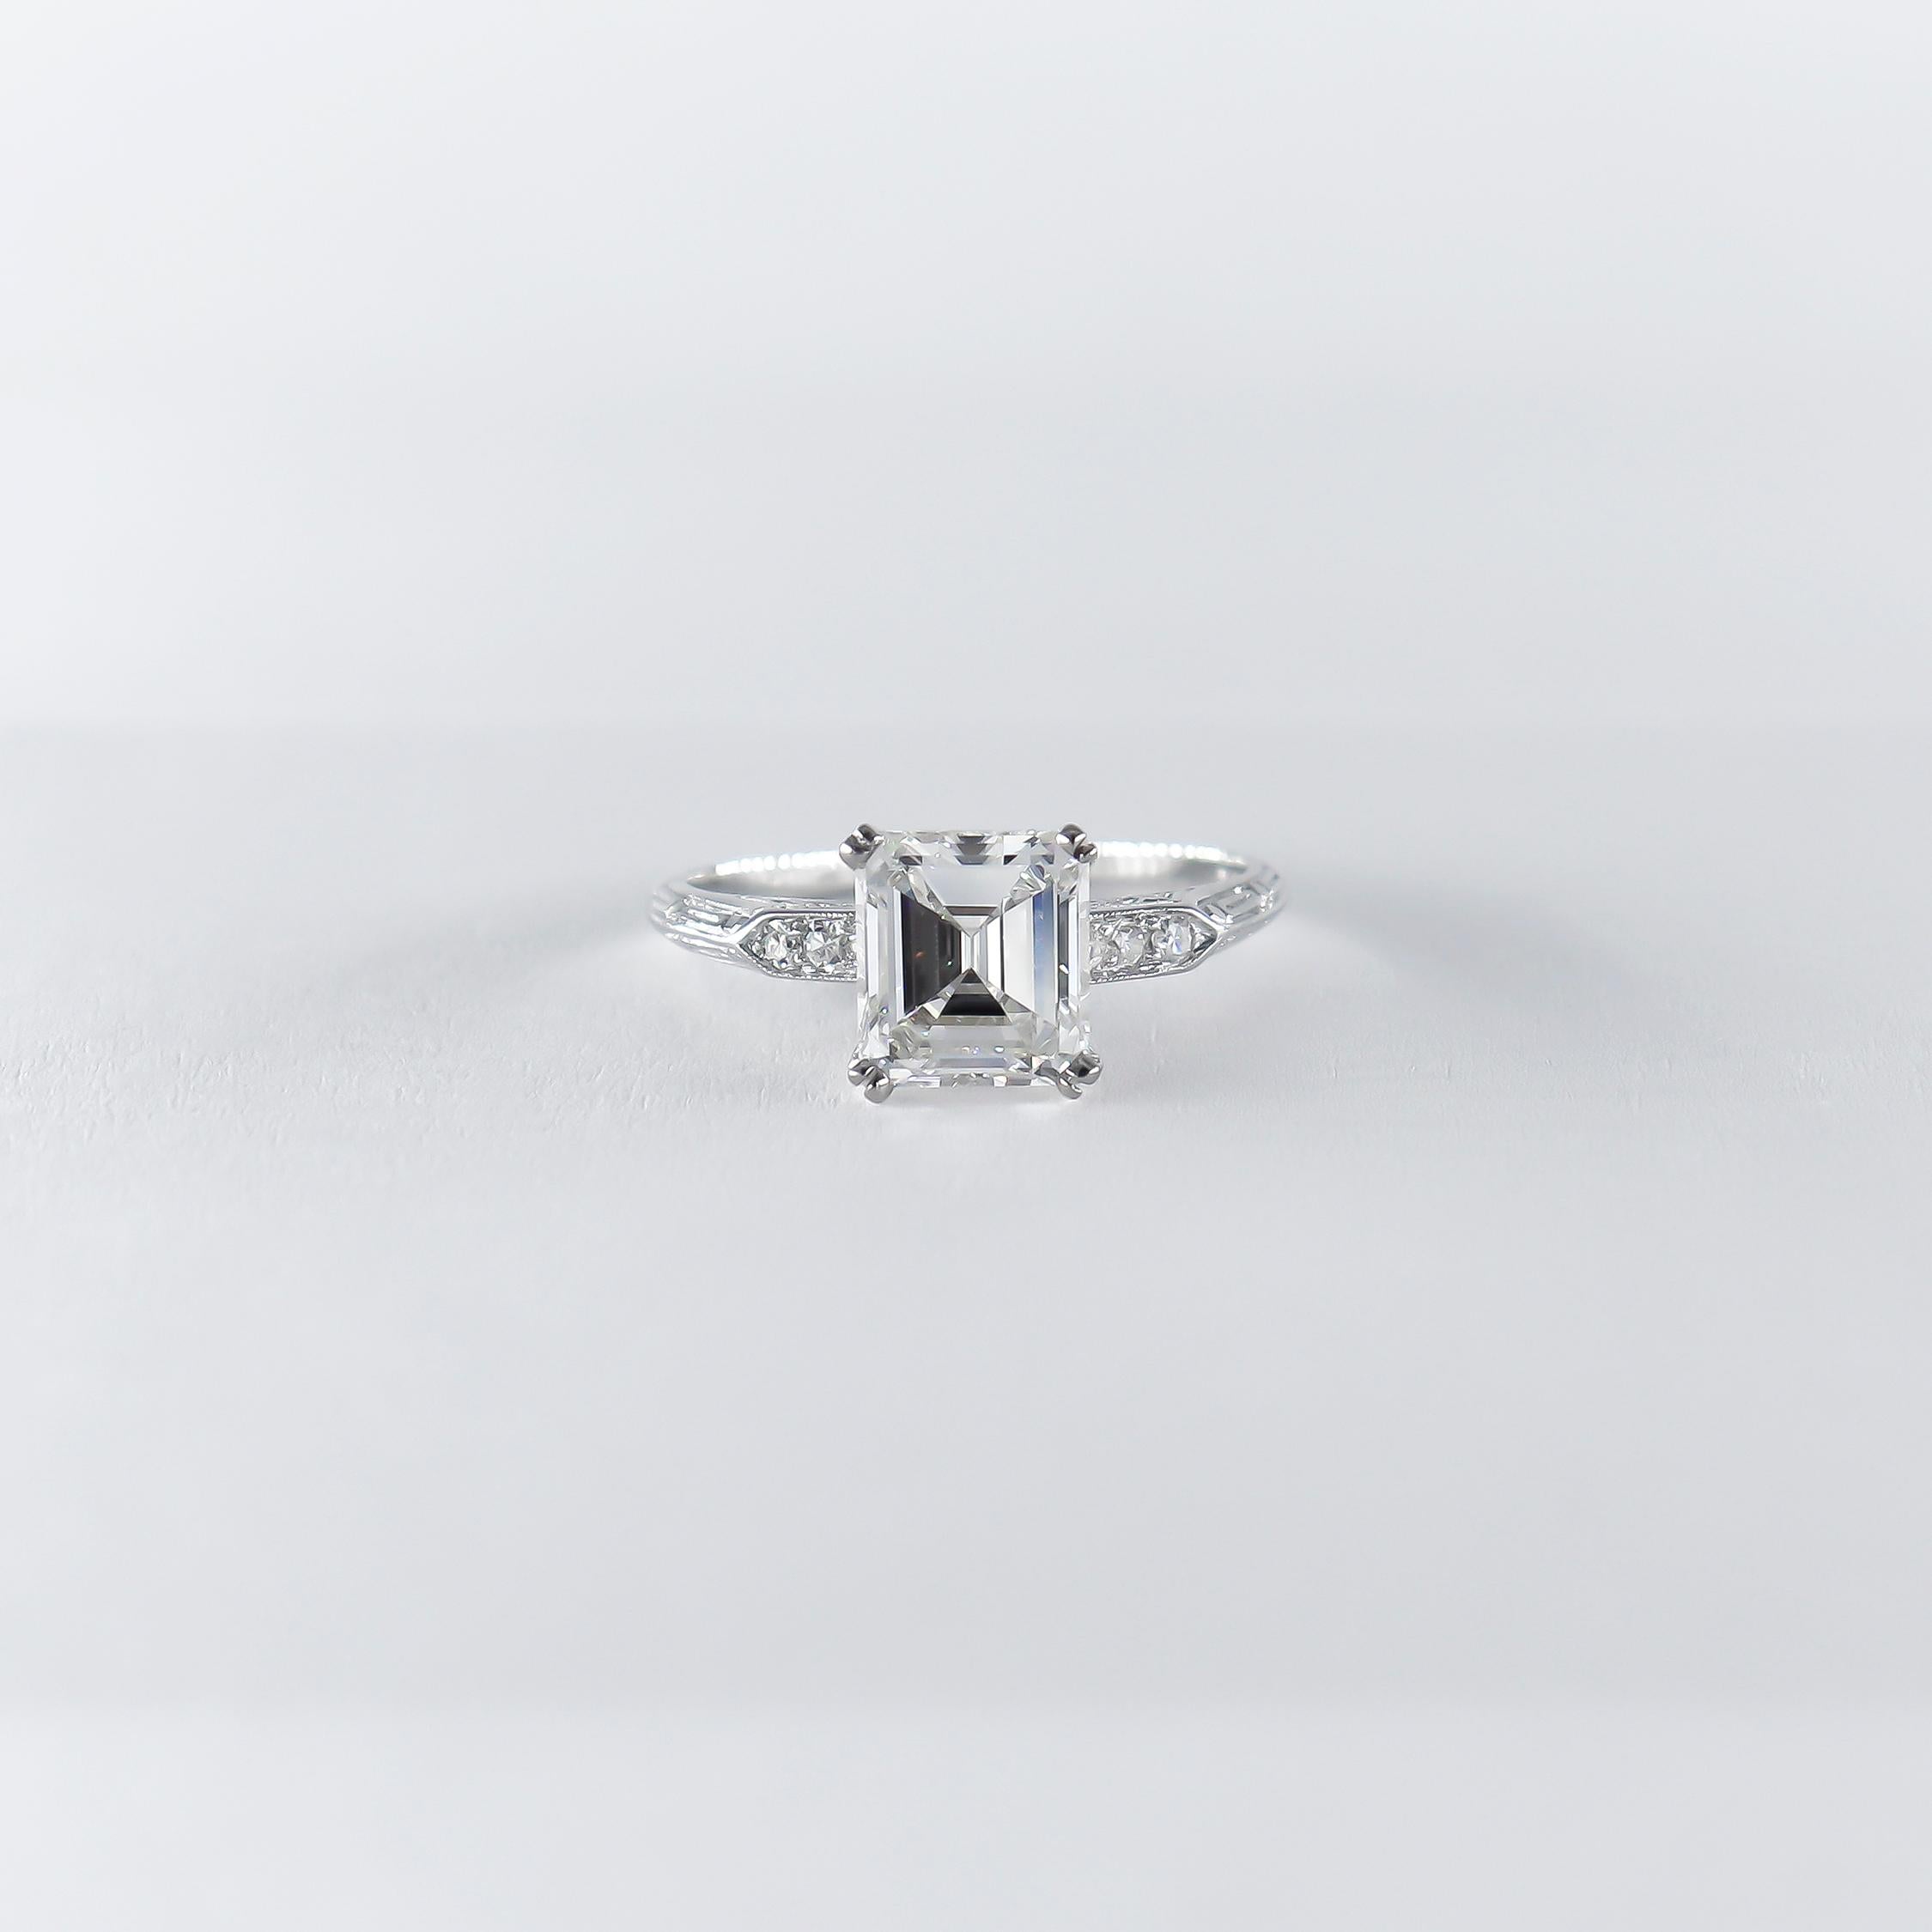 This charming ring from the J. Birnbach vault features a certified 1.73 carat emerald cut diamond of G color and VS2 clarity as described by GIA grading report #6224257297. Set in a handmade, platinum ring with bright-cut pavé and hand engraved